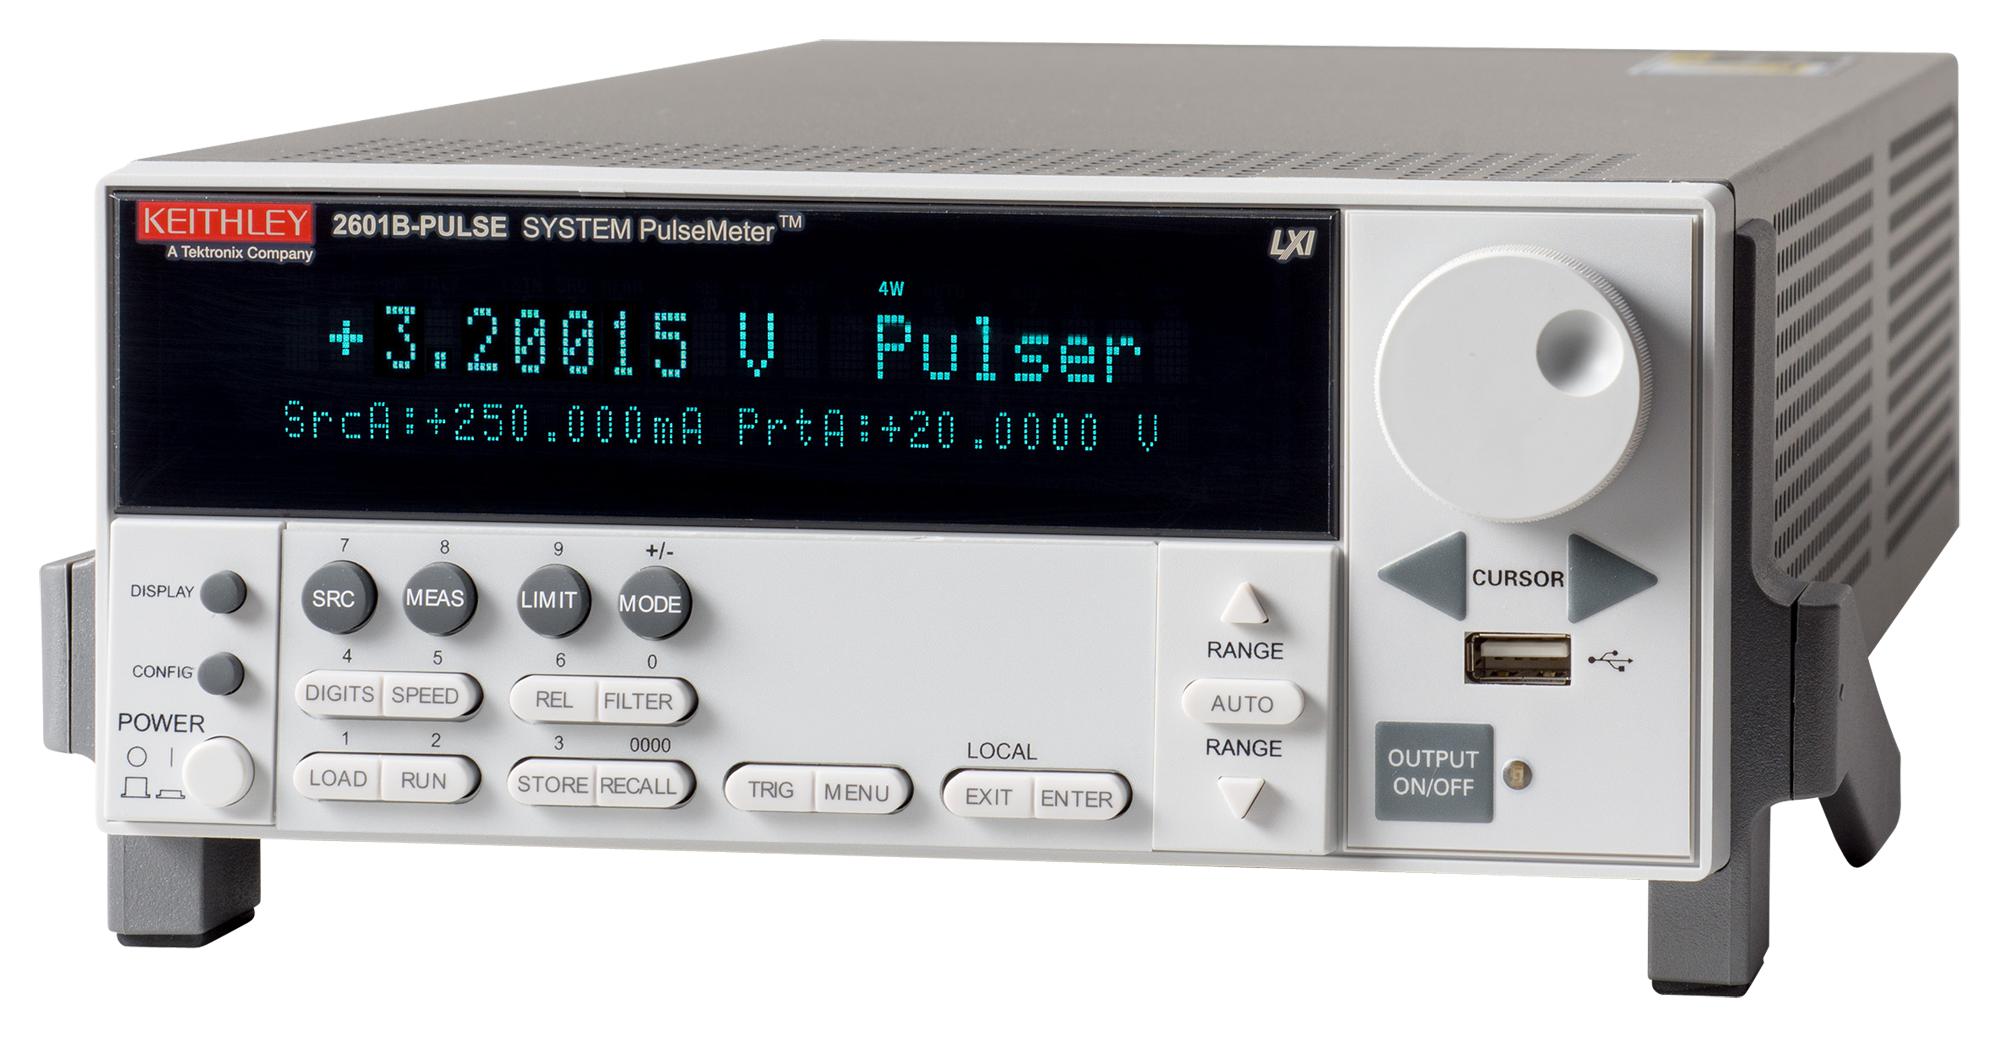 2601B-PULSE PULSE SYSTEM SOURCE METER, 10A, 40V KEITHLEY